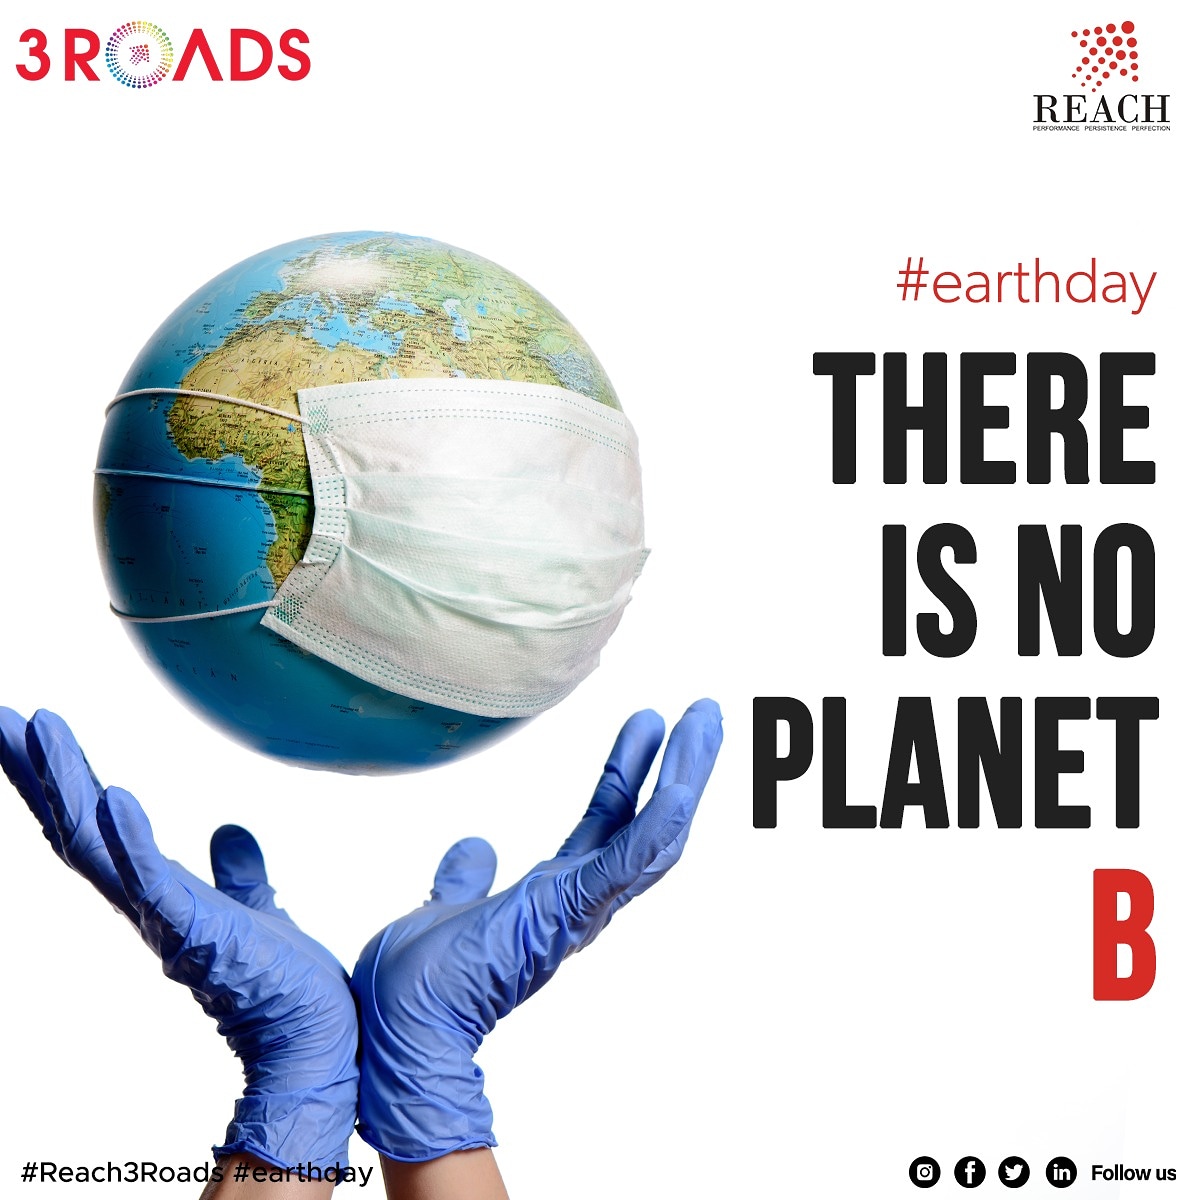 Reminder: There Is No Planet B!

This Earth Day—and everyday—we encourage everyone to find one small act they can do to restore our Earth. 

Happy Earth Day 2021!

#earthday 
 #noplanetb
#saveearth🌍 #plantmoretrees #savewater #bemindfulbekind #doyourpart